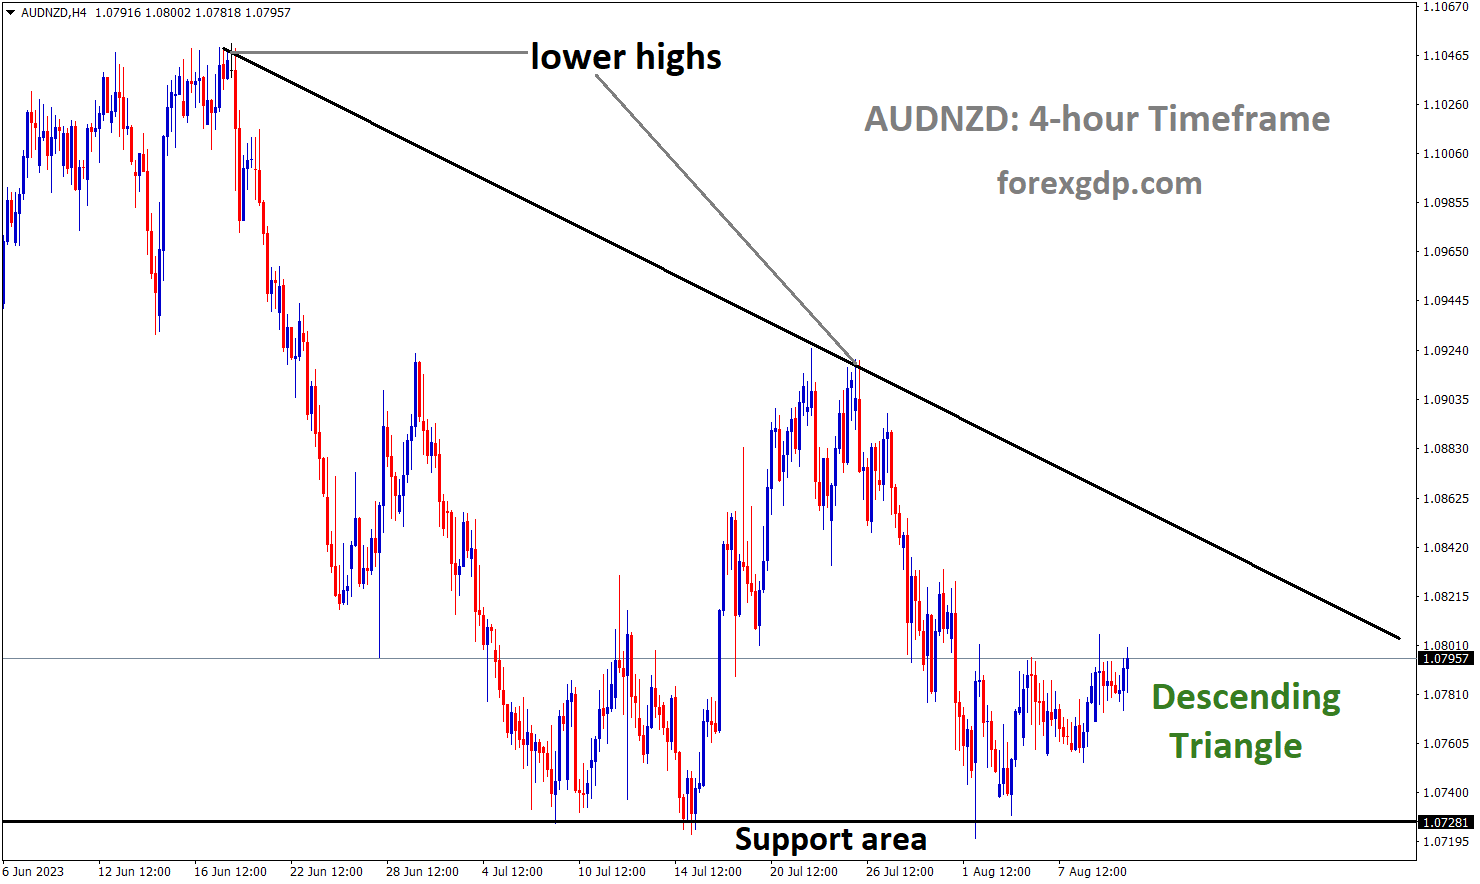 AUDNZD is moving in the Descending triangle pattern and the market has rebounded from the horizontal support area of the pattern